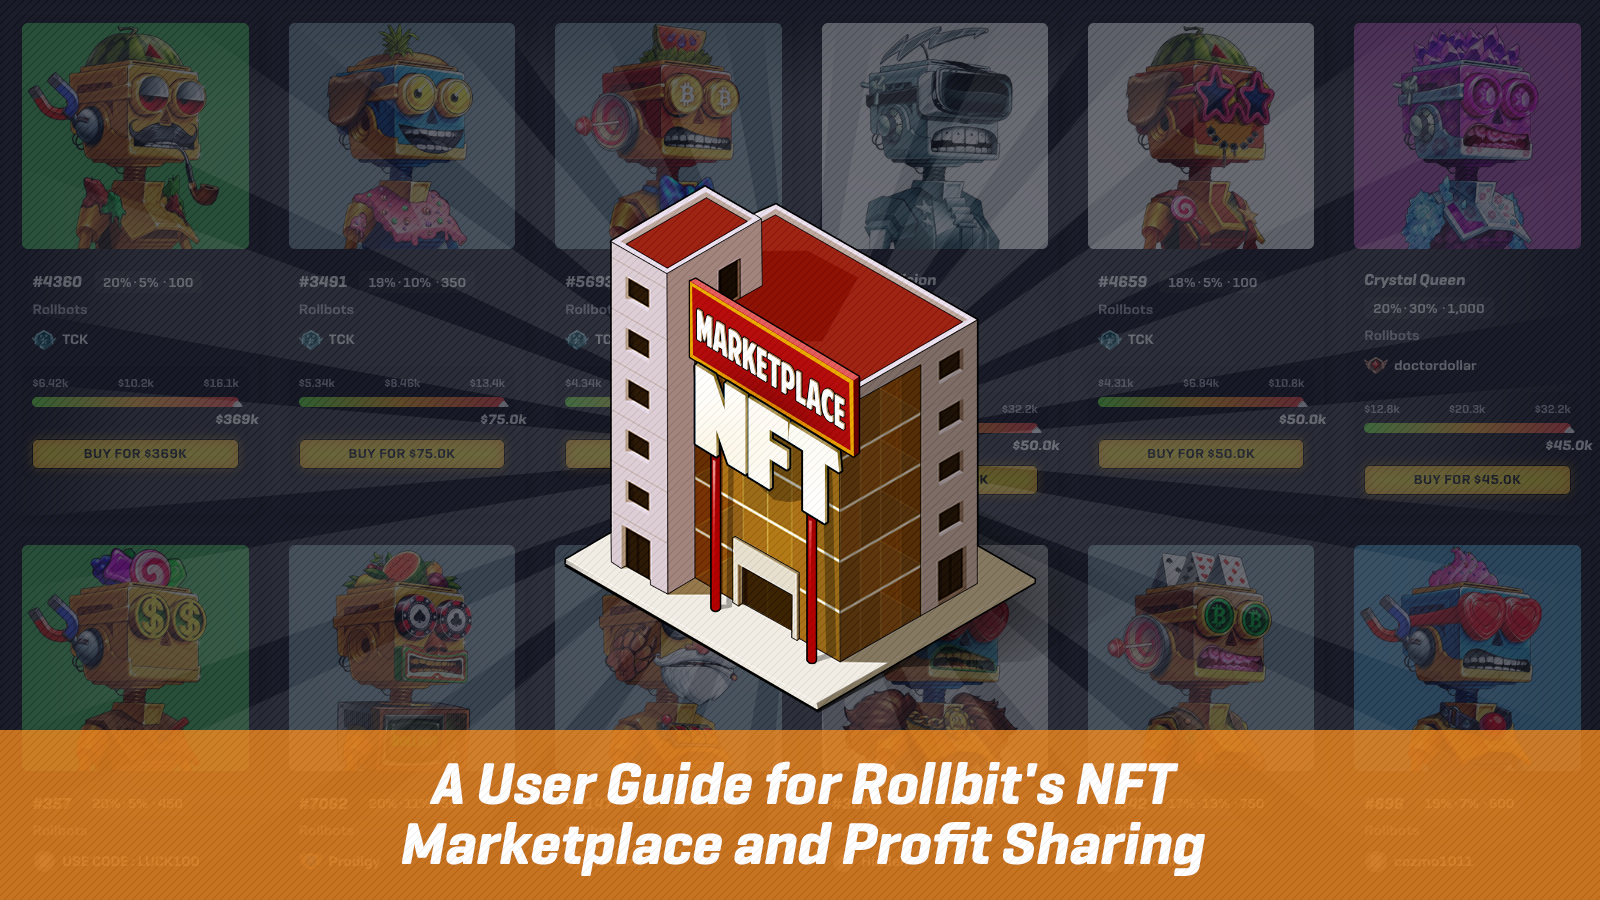 A User Guide for Rollbit's NFT Marketplace and Profit Sharing